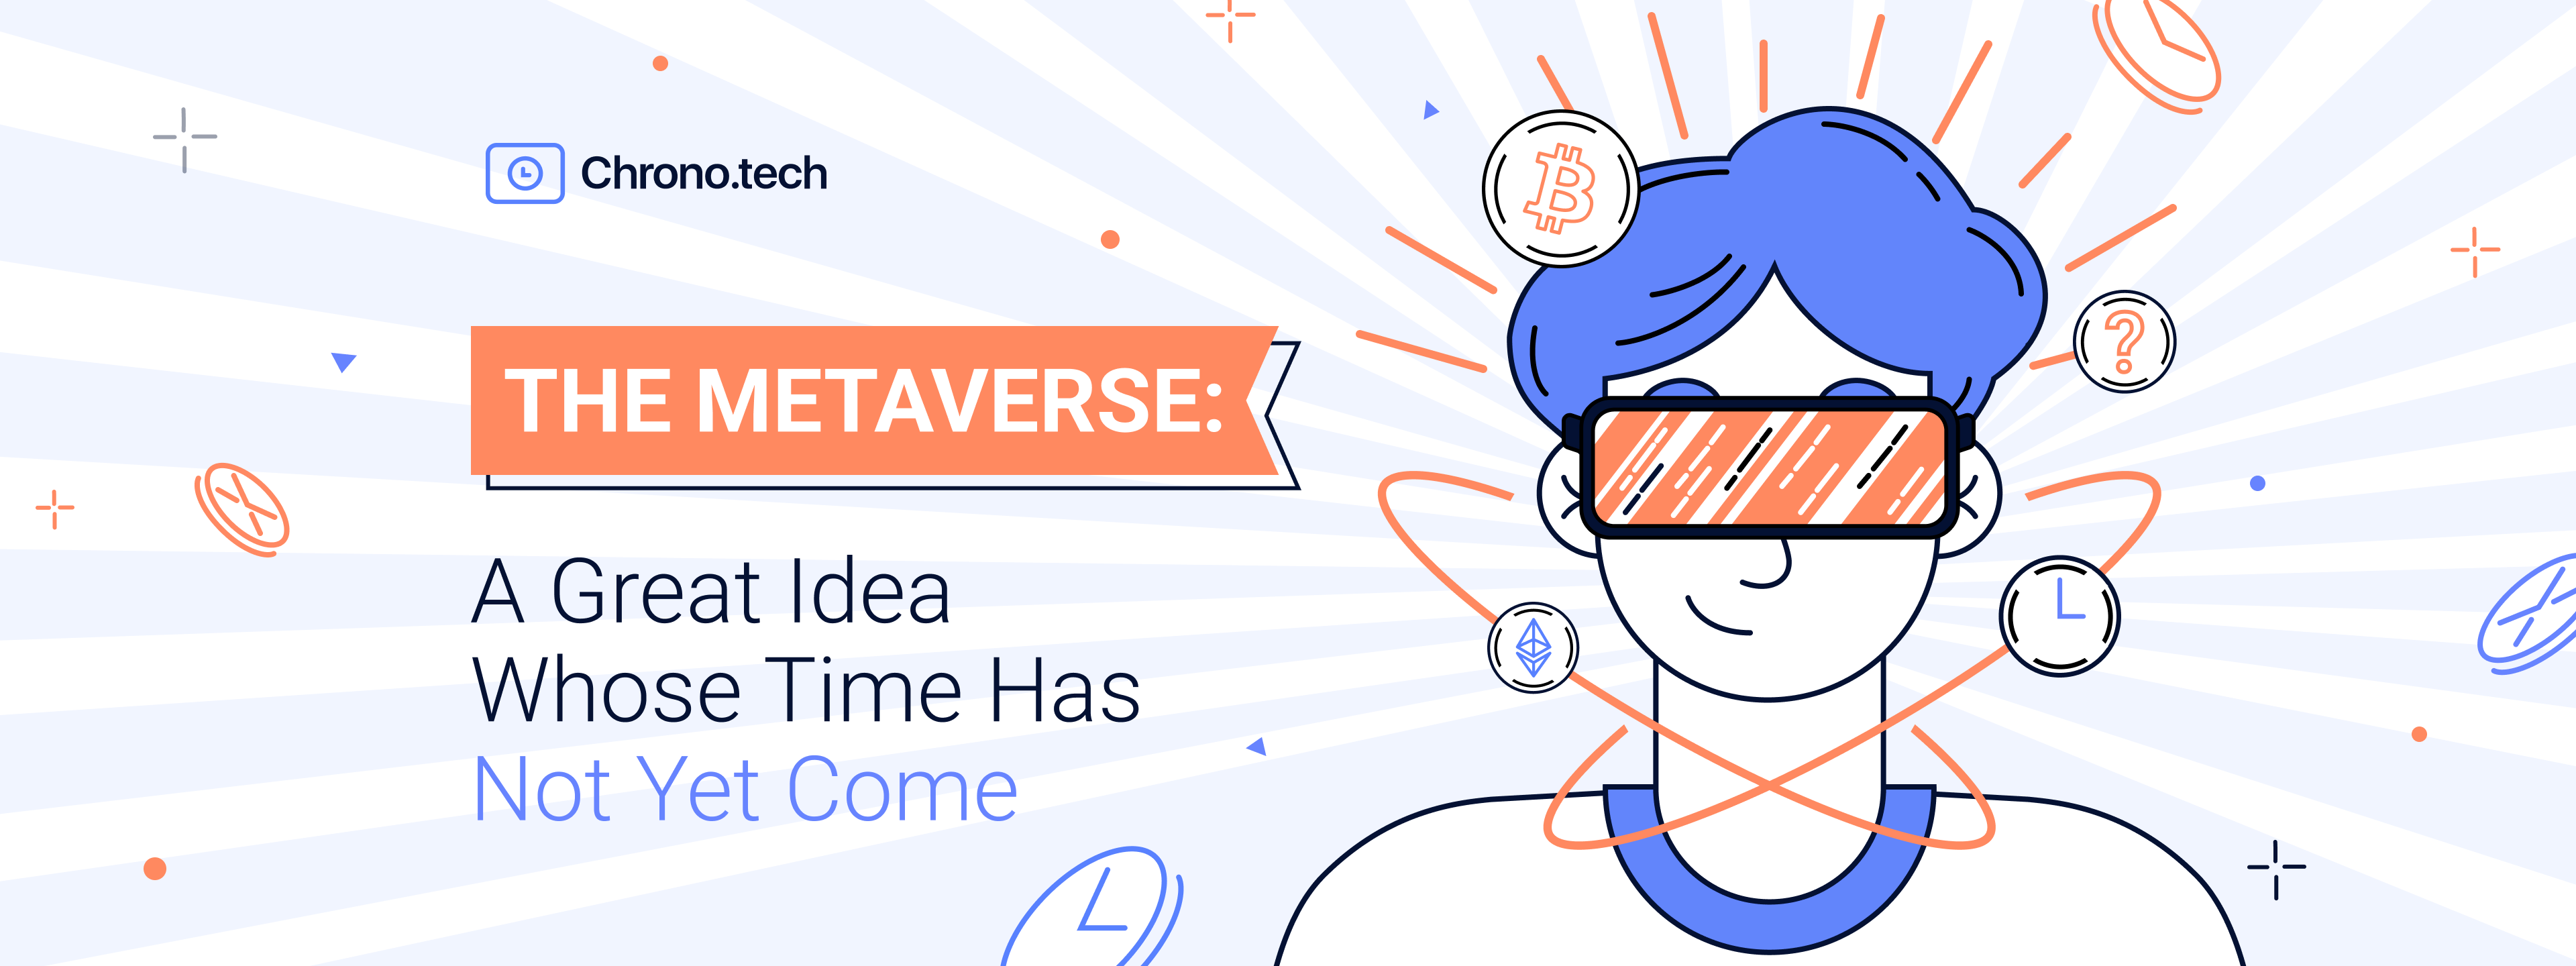 ​The Metaverse: A Great Idea Whose Time Has Not Yet Come